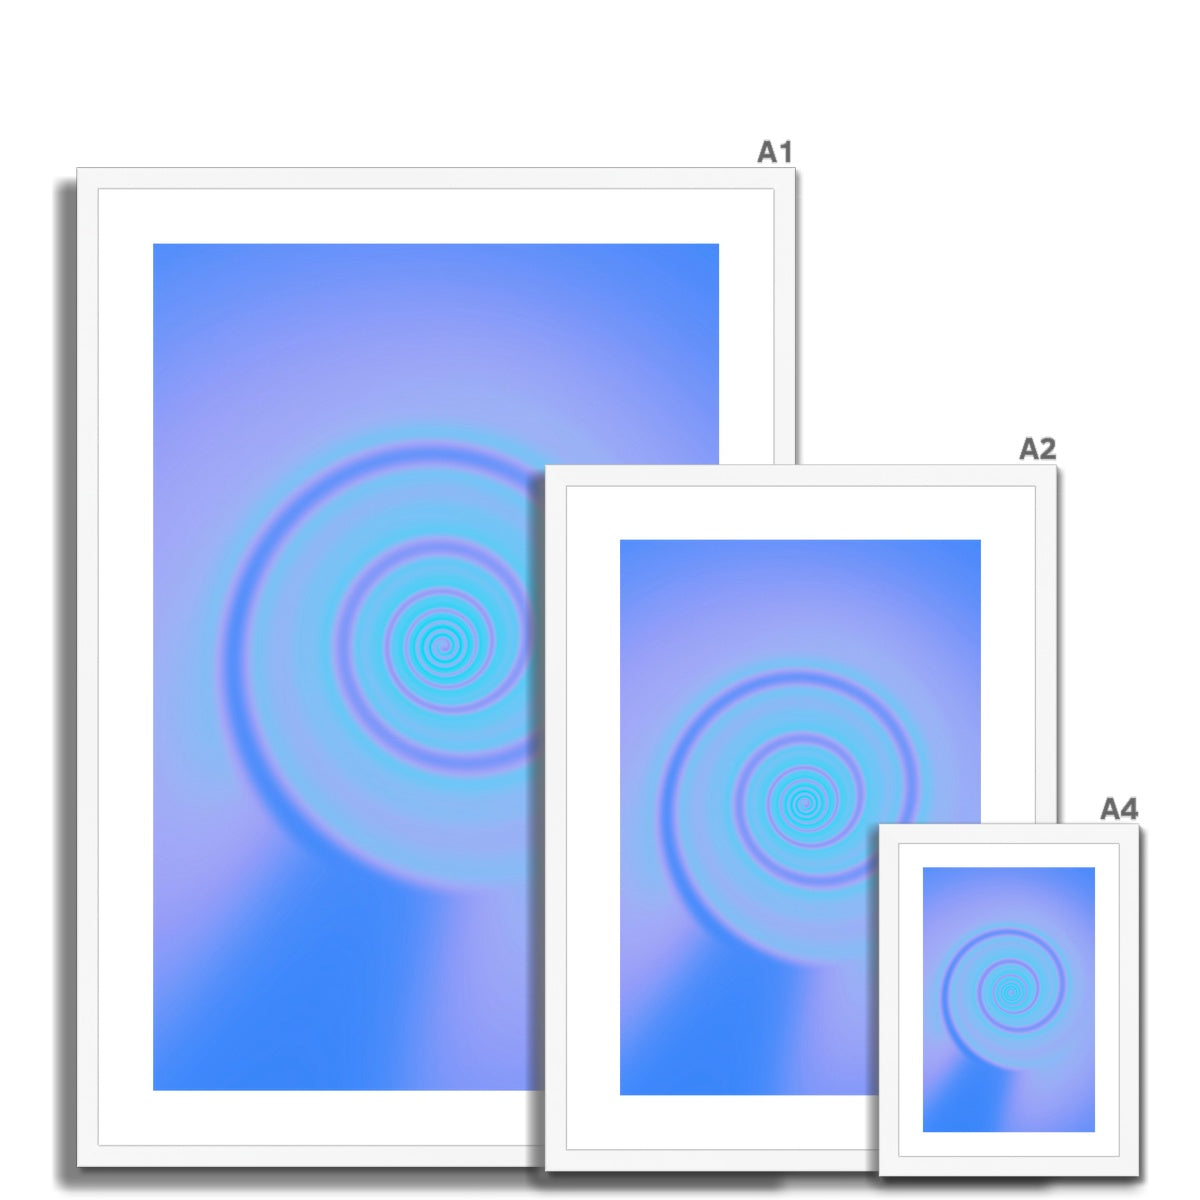 © les muses / Abstract aura wall art prints featuring warped gradients swirled to appear similar to a rabbit hole. Our colorful aura gradient posters are an aesthetic addition to any dorm or apartment decor.